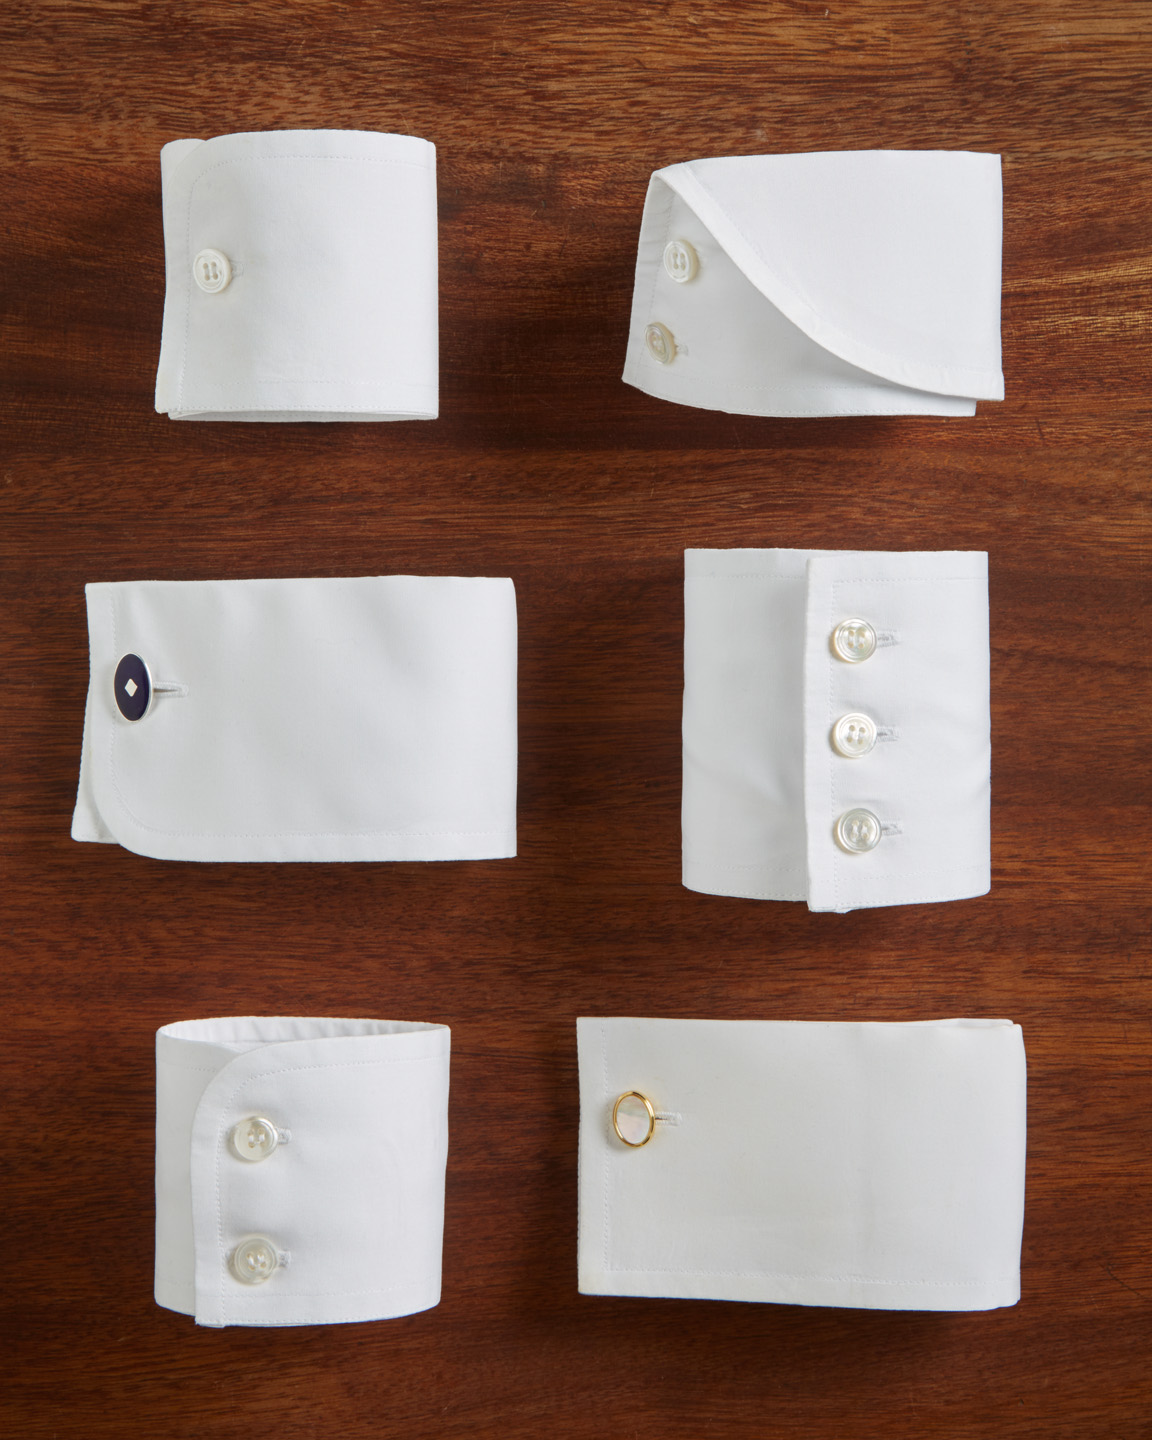 Designer Shirt Buttons - Rounded Edge Collar/Sleeve/Front Shirt